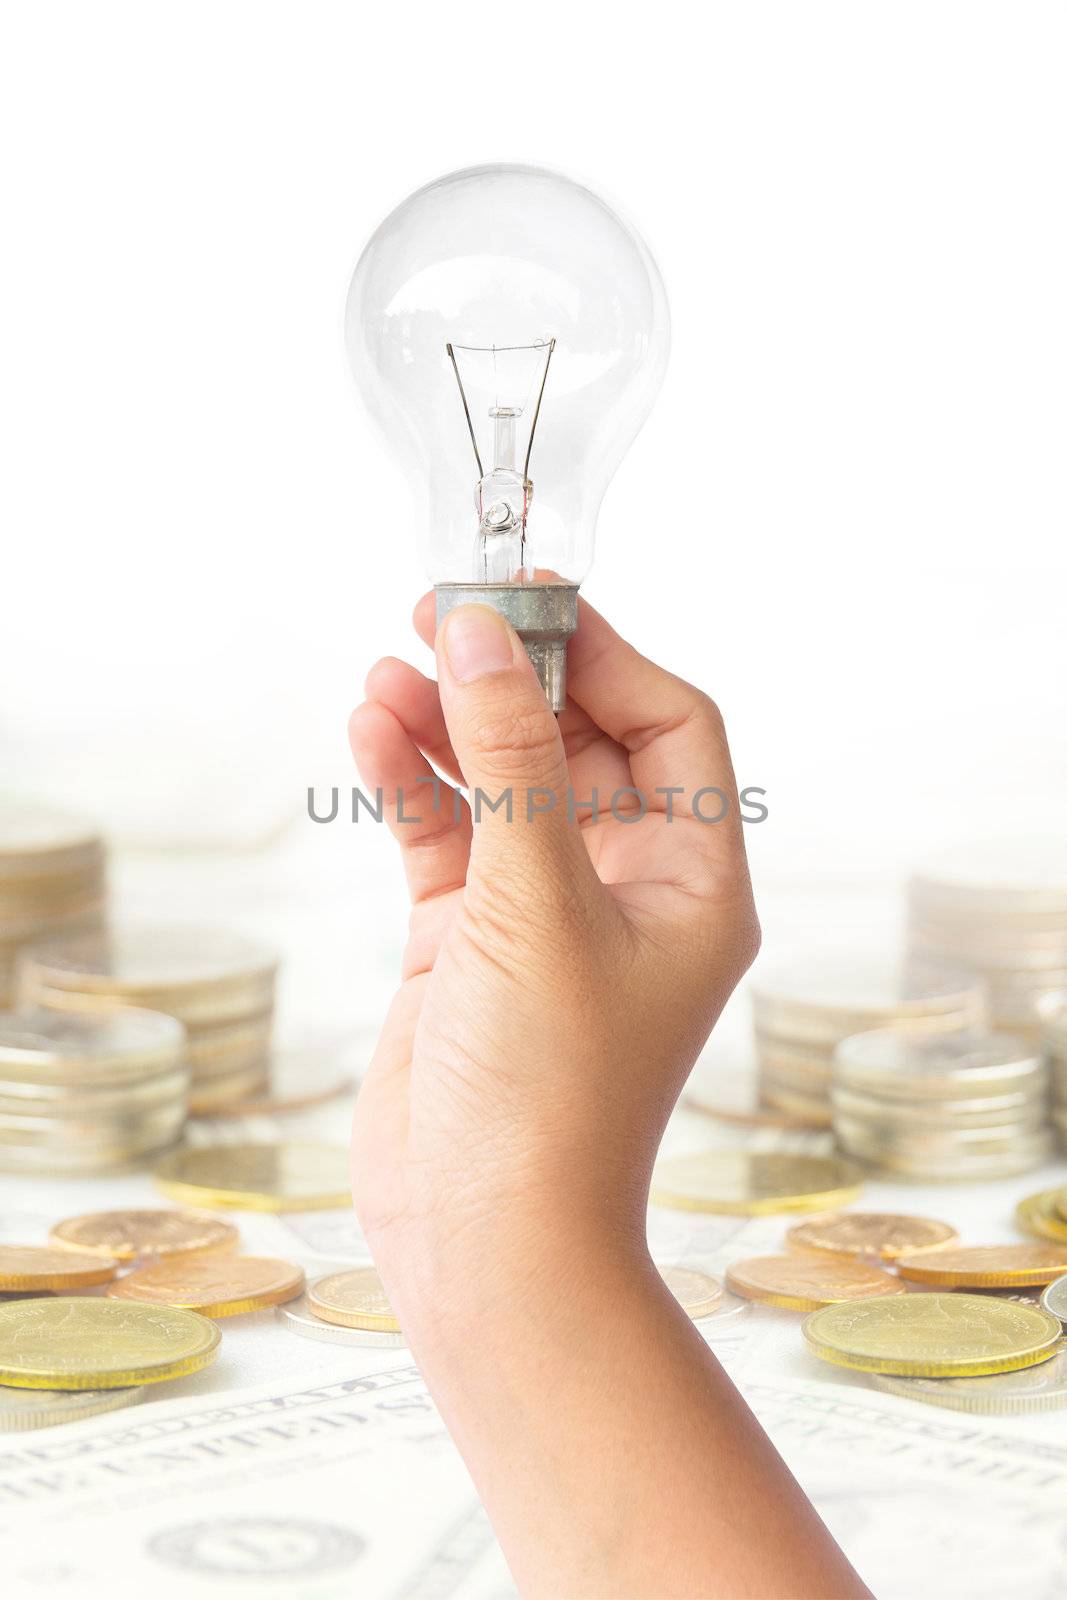 light blub in hand with money background by ponsulak